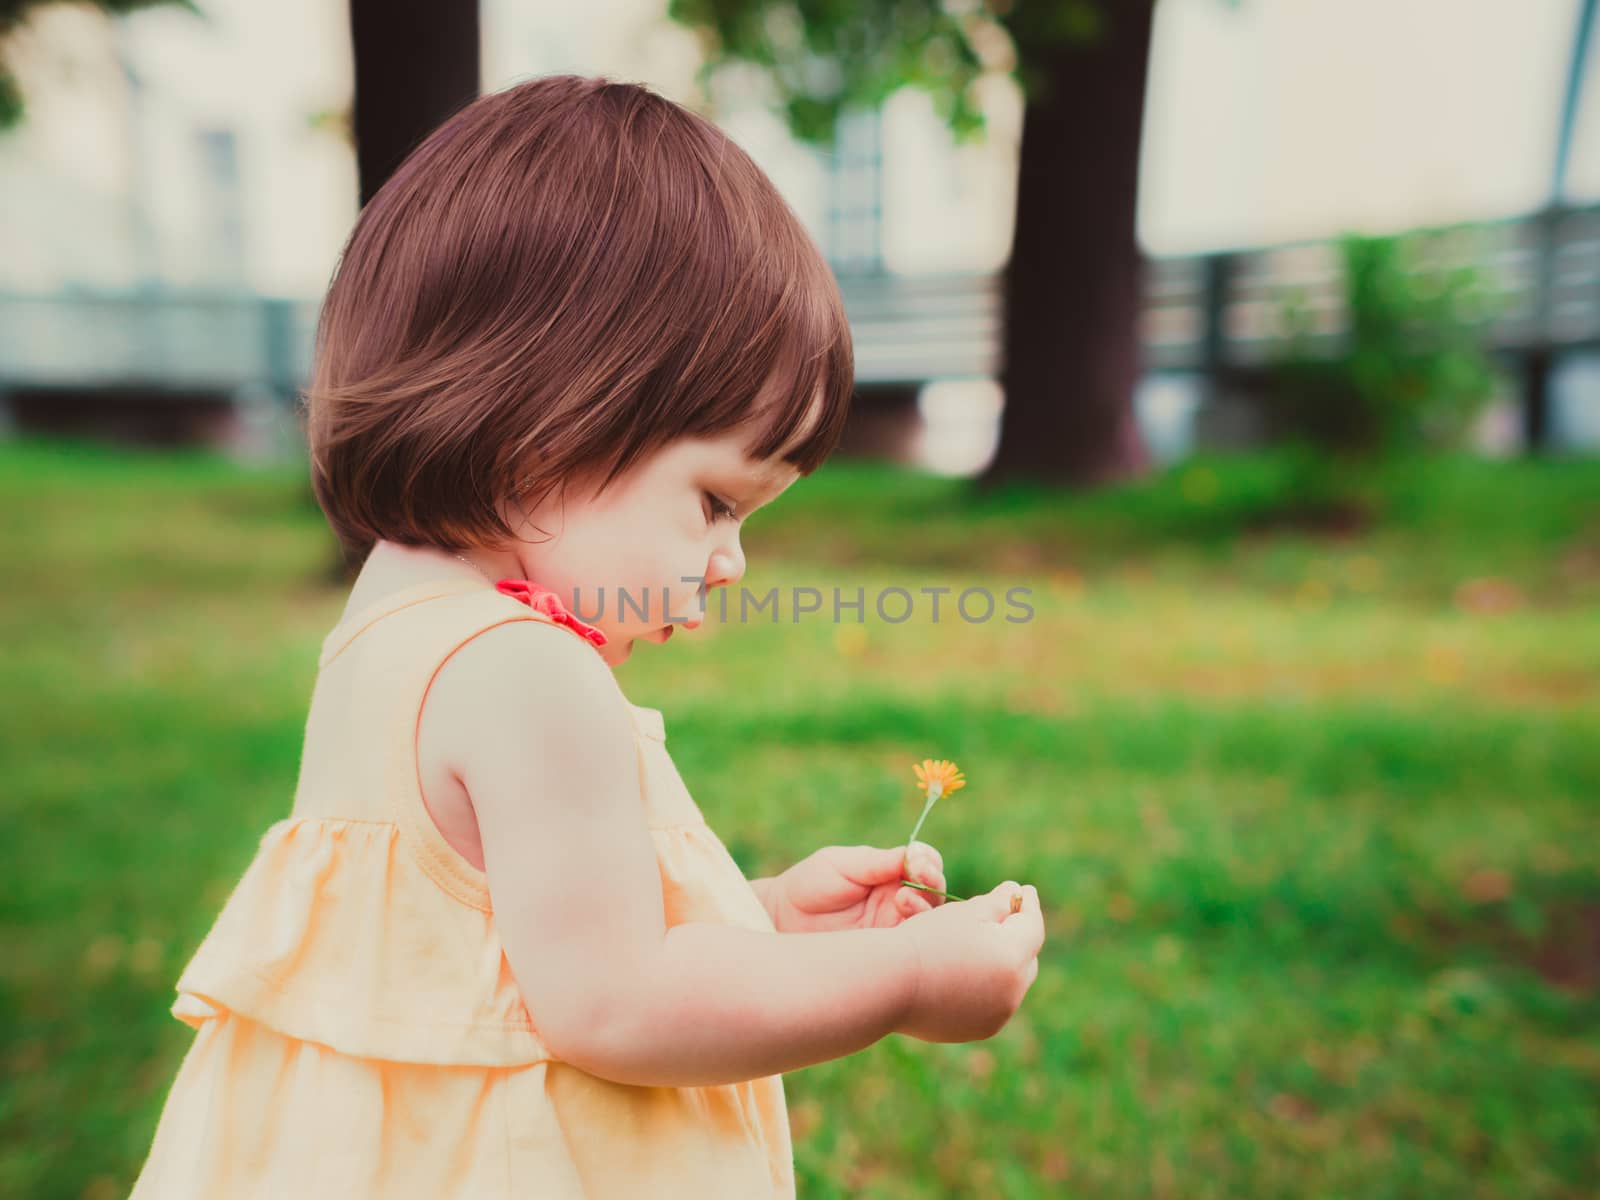 Little Baby Girl Portrait in profile outdoor. Cute Child over nature background. Adorable one year old baby with flower in hands